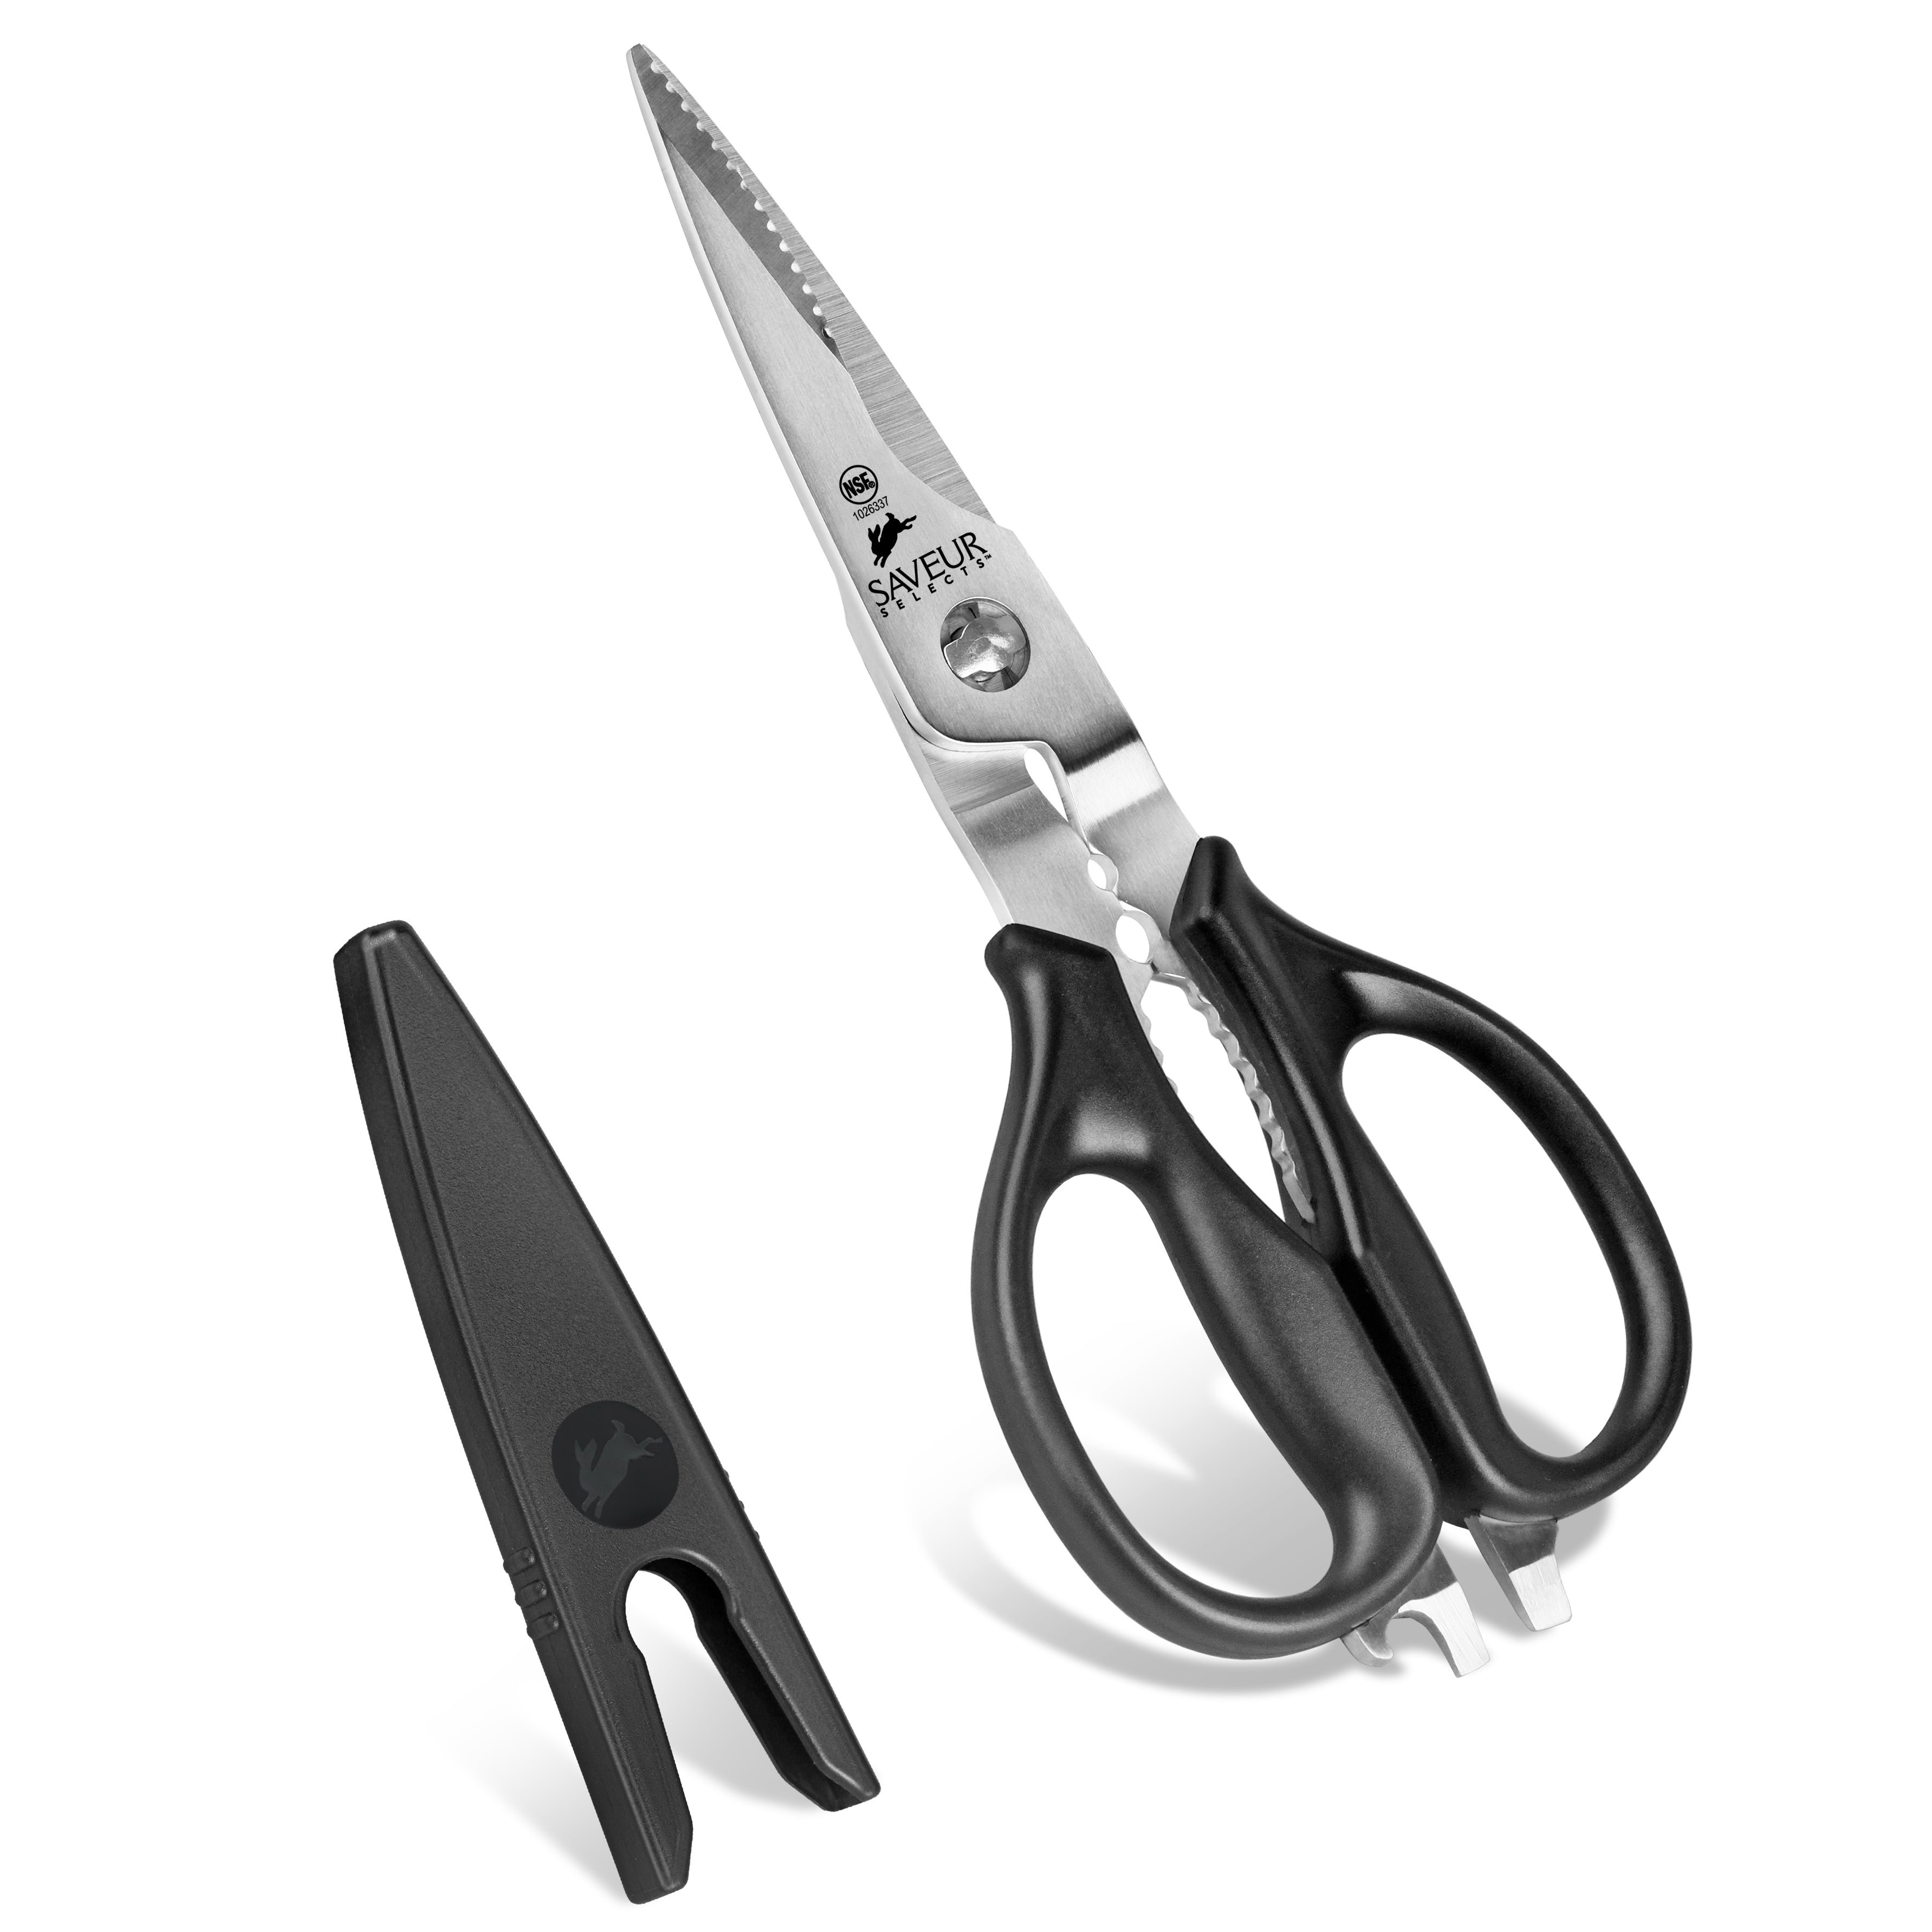 Gingher Scissors,6 in.,SS,Multipurpose 220070-1001, 1 - Dillons Food Stores